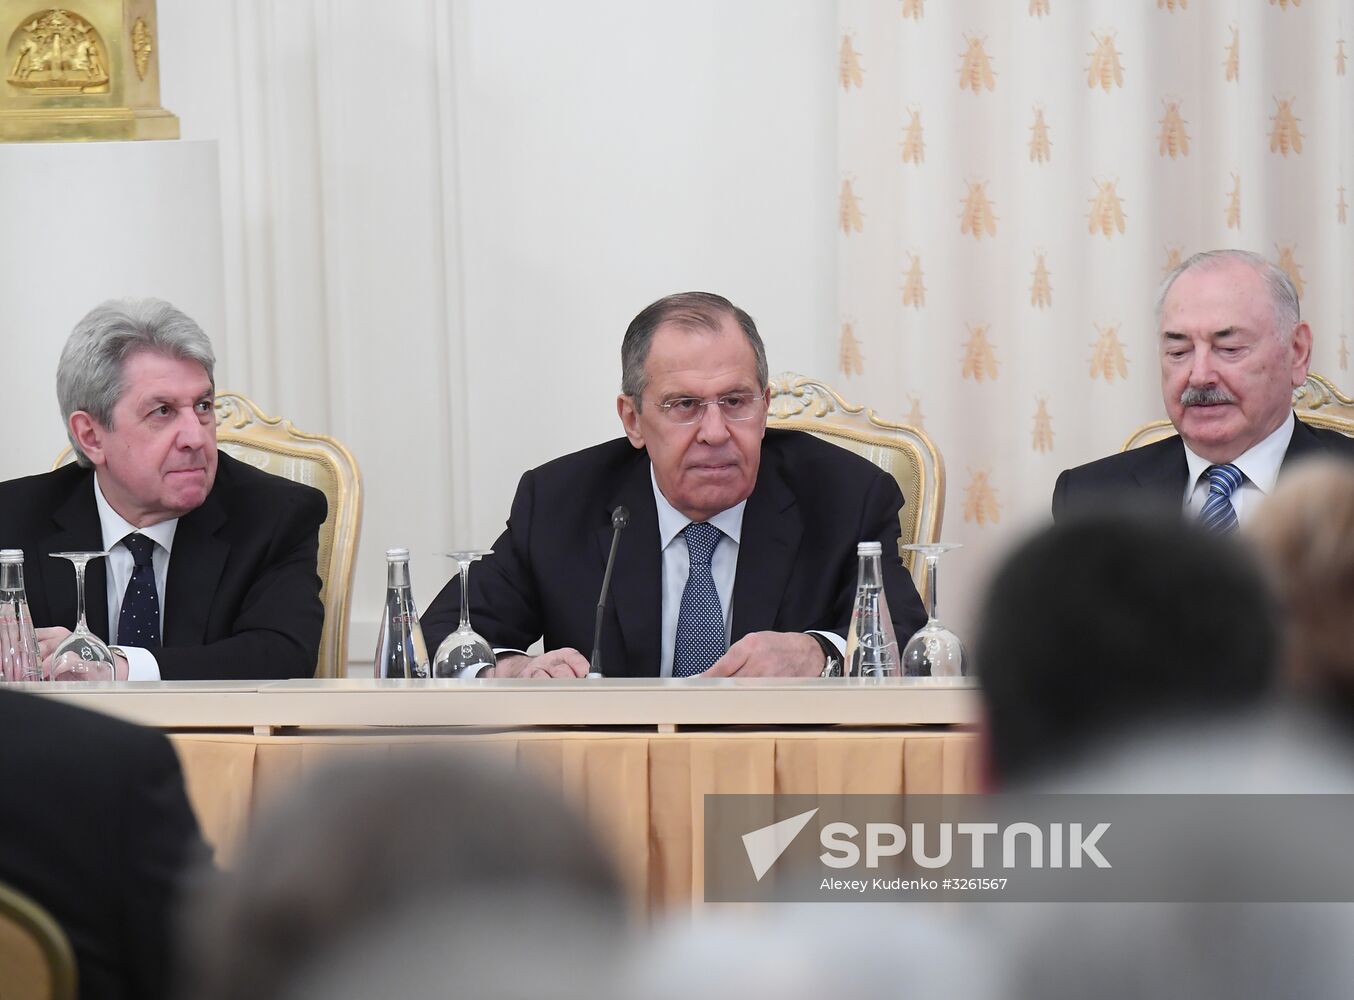 Meeting of Commission for UNESCO involving Foreign Minister Sergei Lavrov